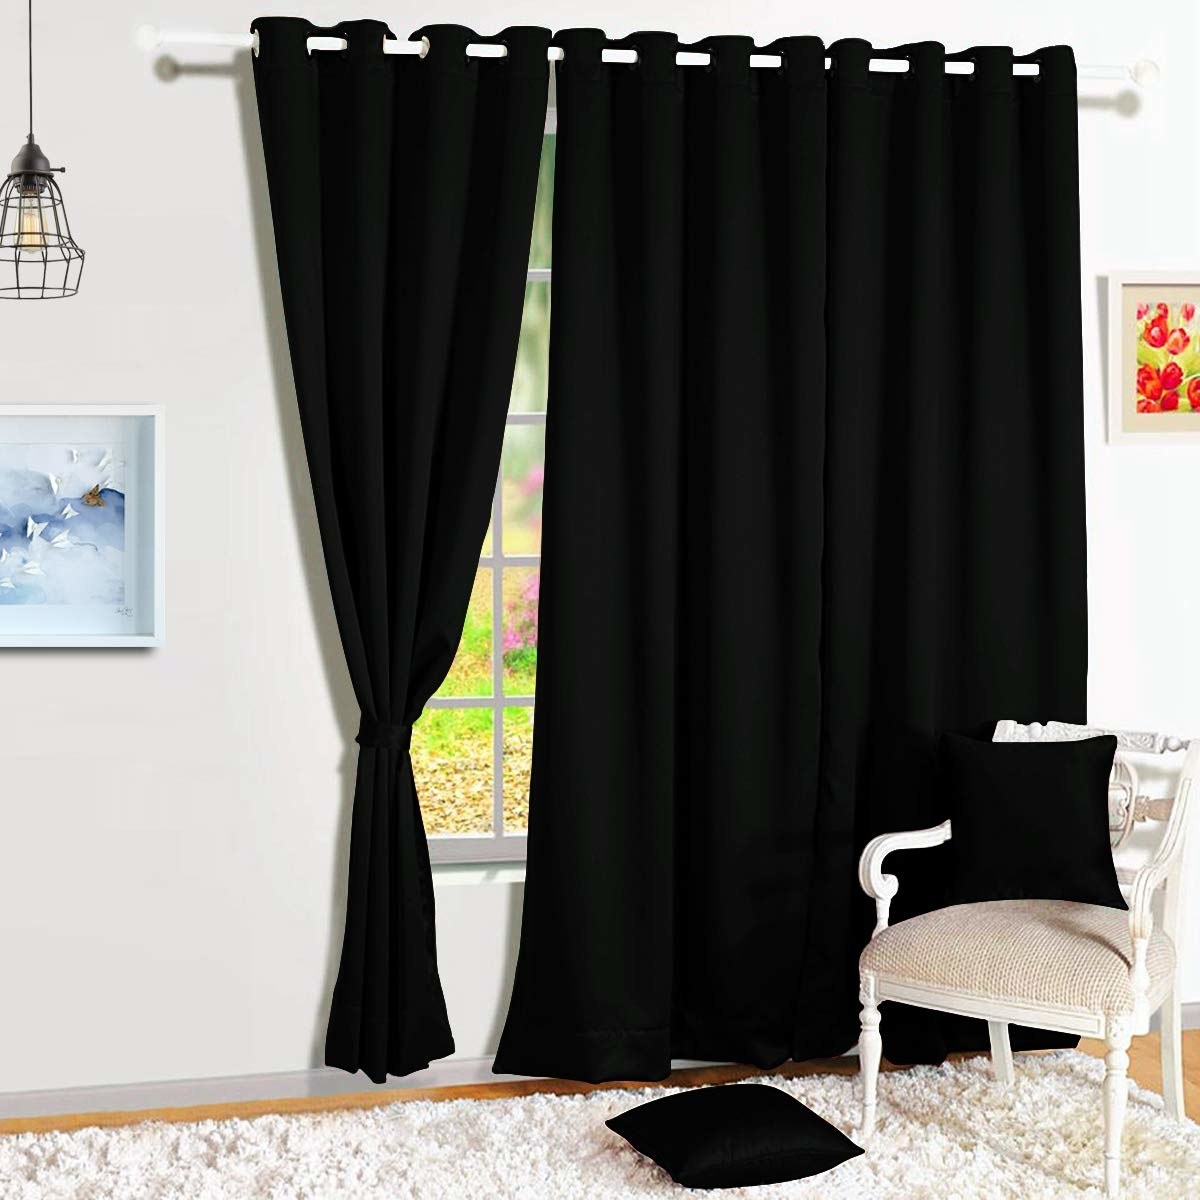 Blackout curtains on a window next to a chair with pillows on it